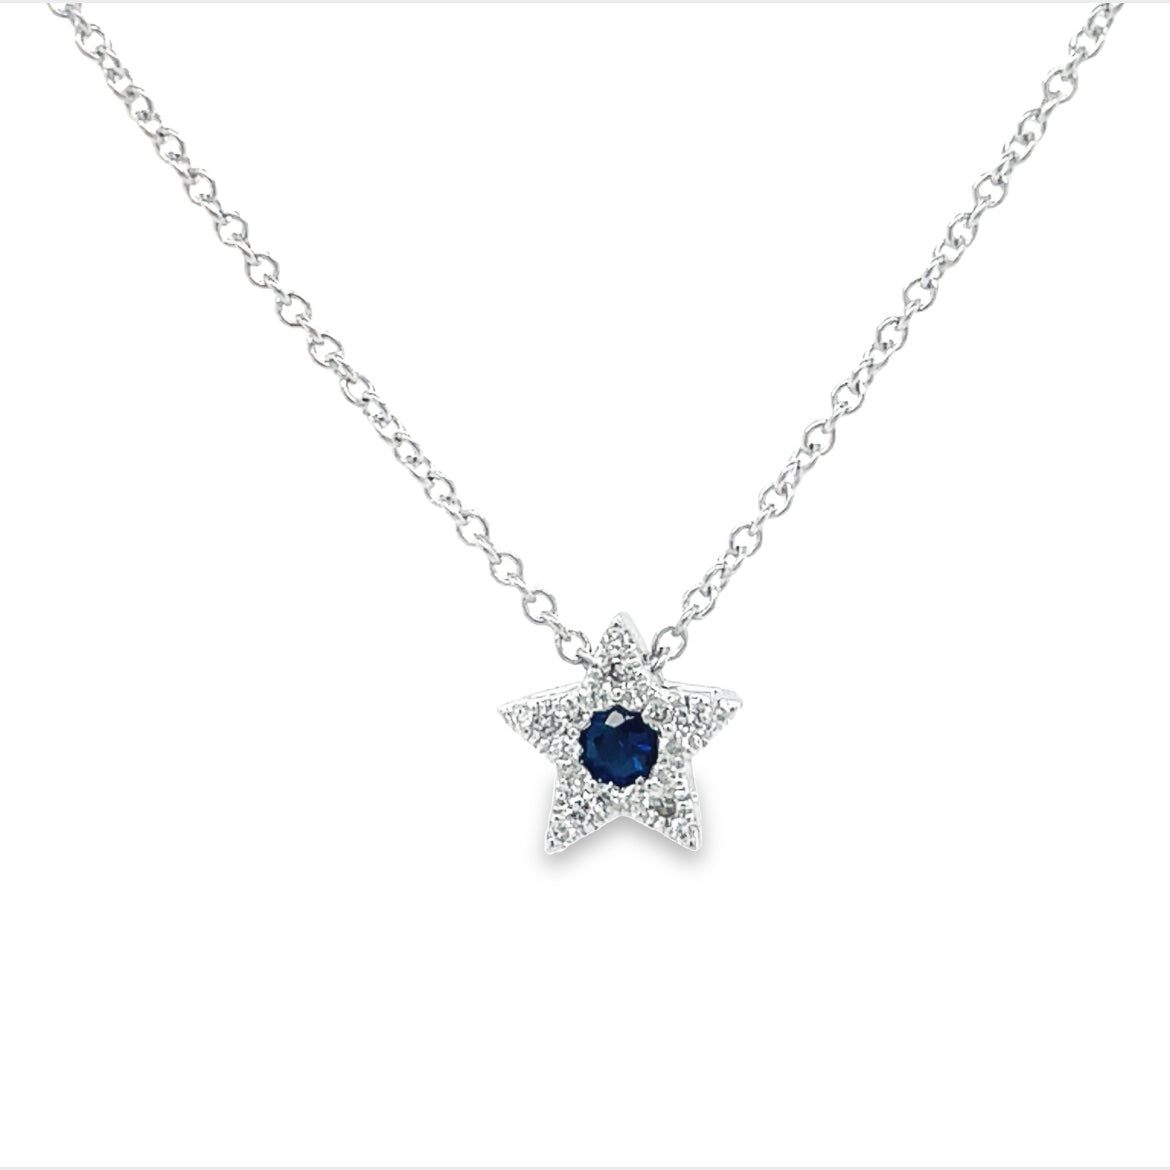 Beautifully crafted in 18k white gold, this 9.00 mm pendant features round diamonds of 0.15 cts and a round sapphire of 0.10 cts in a mesmerizing F/G color. All set on a delicate 16" white gold chain, this piece of jewelry will add a luxe touch to your style!